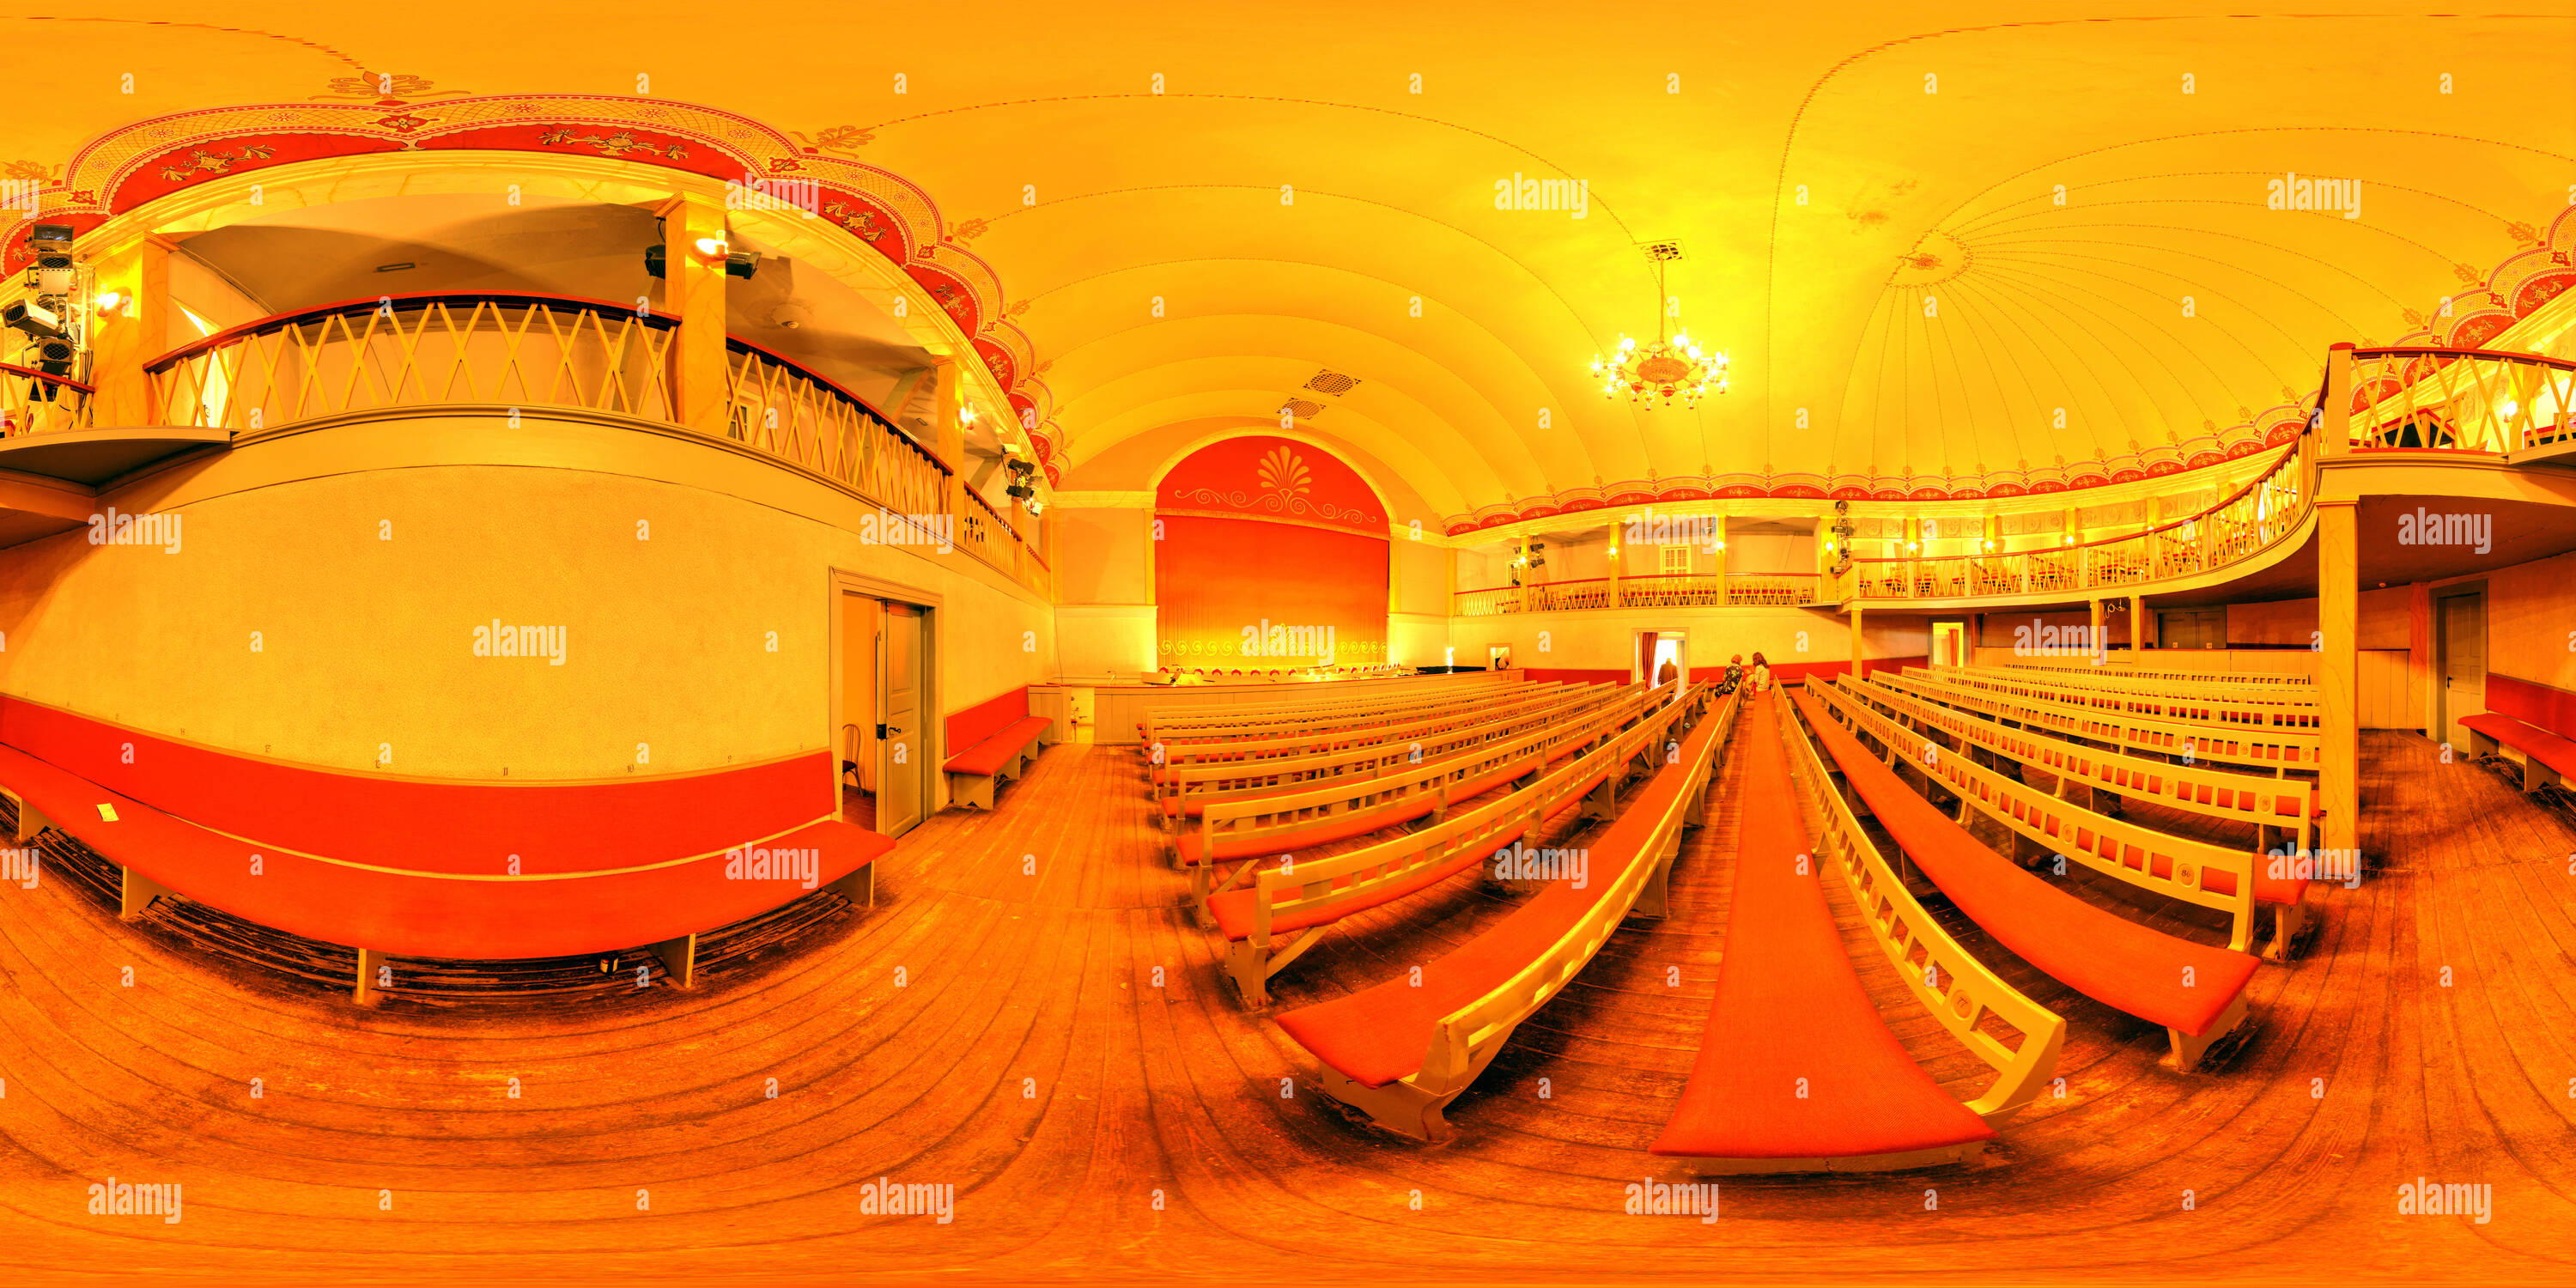 360 degree panoramic view of Goethe Theatre in Bad Lauchstaedt